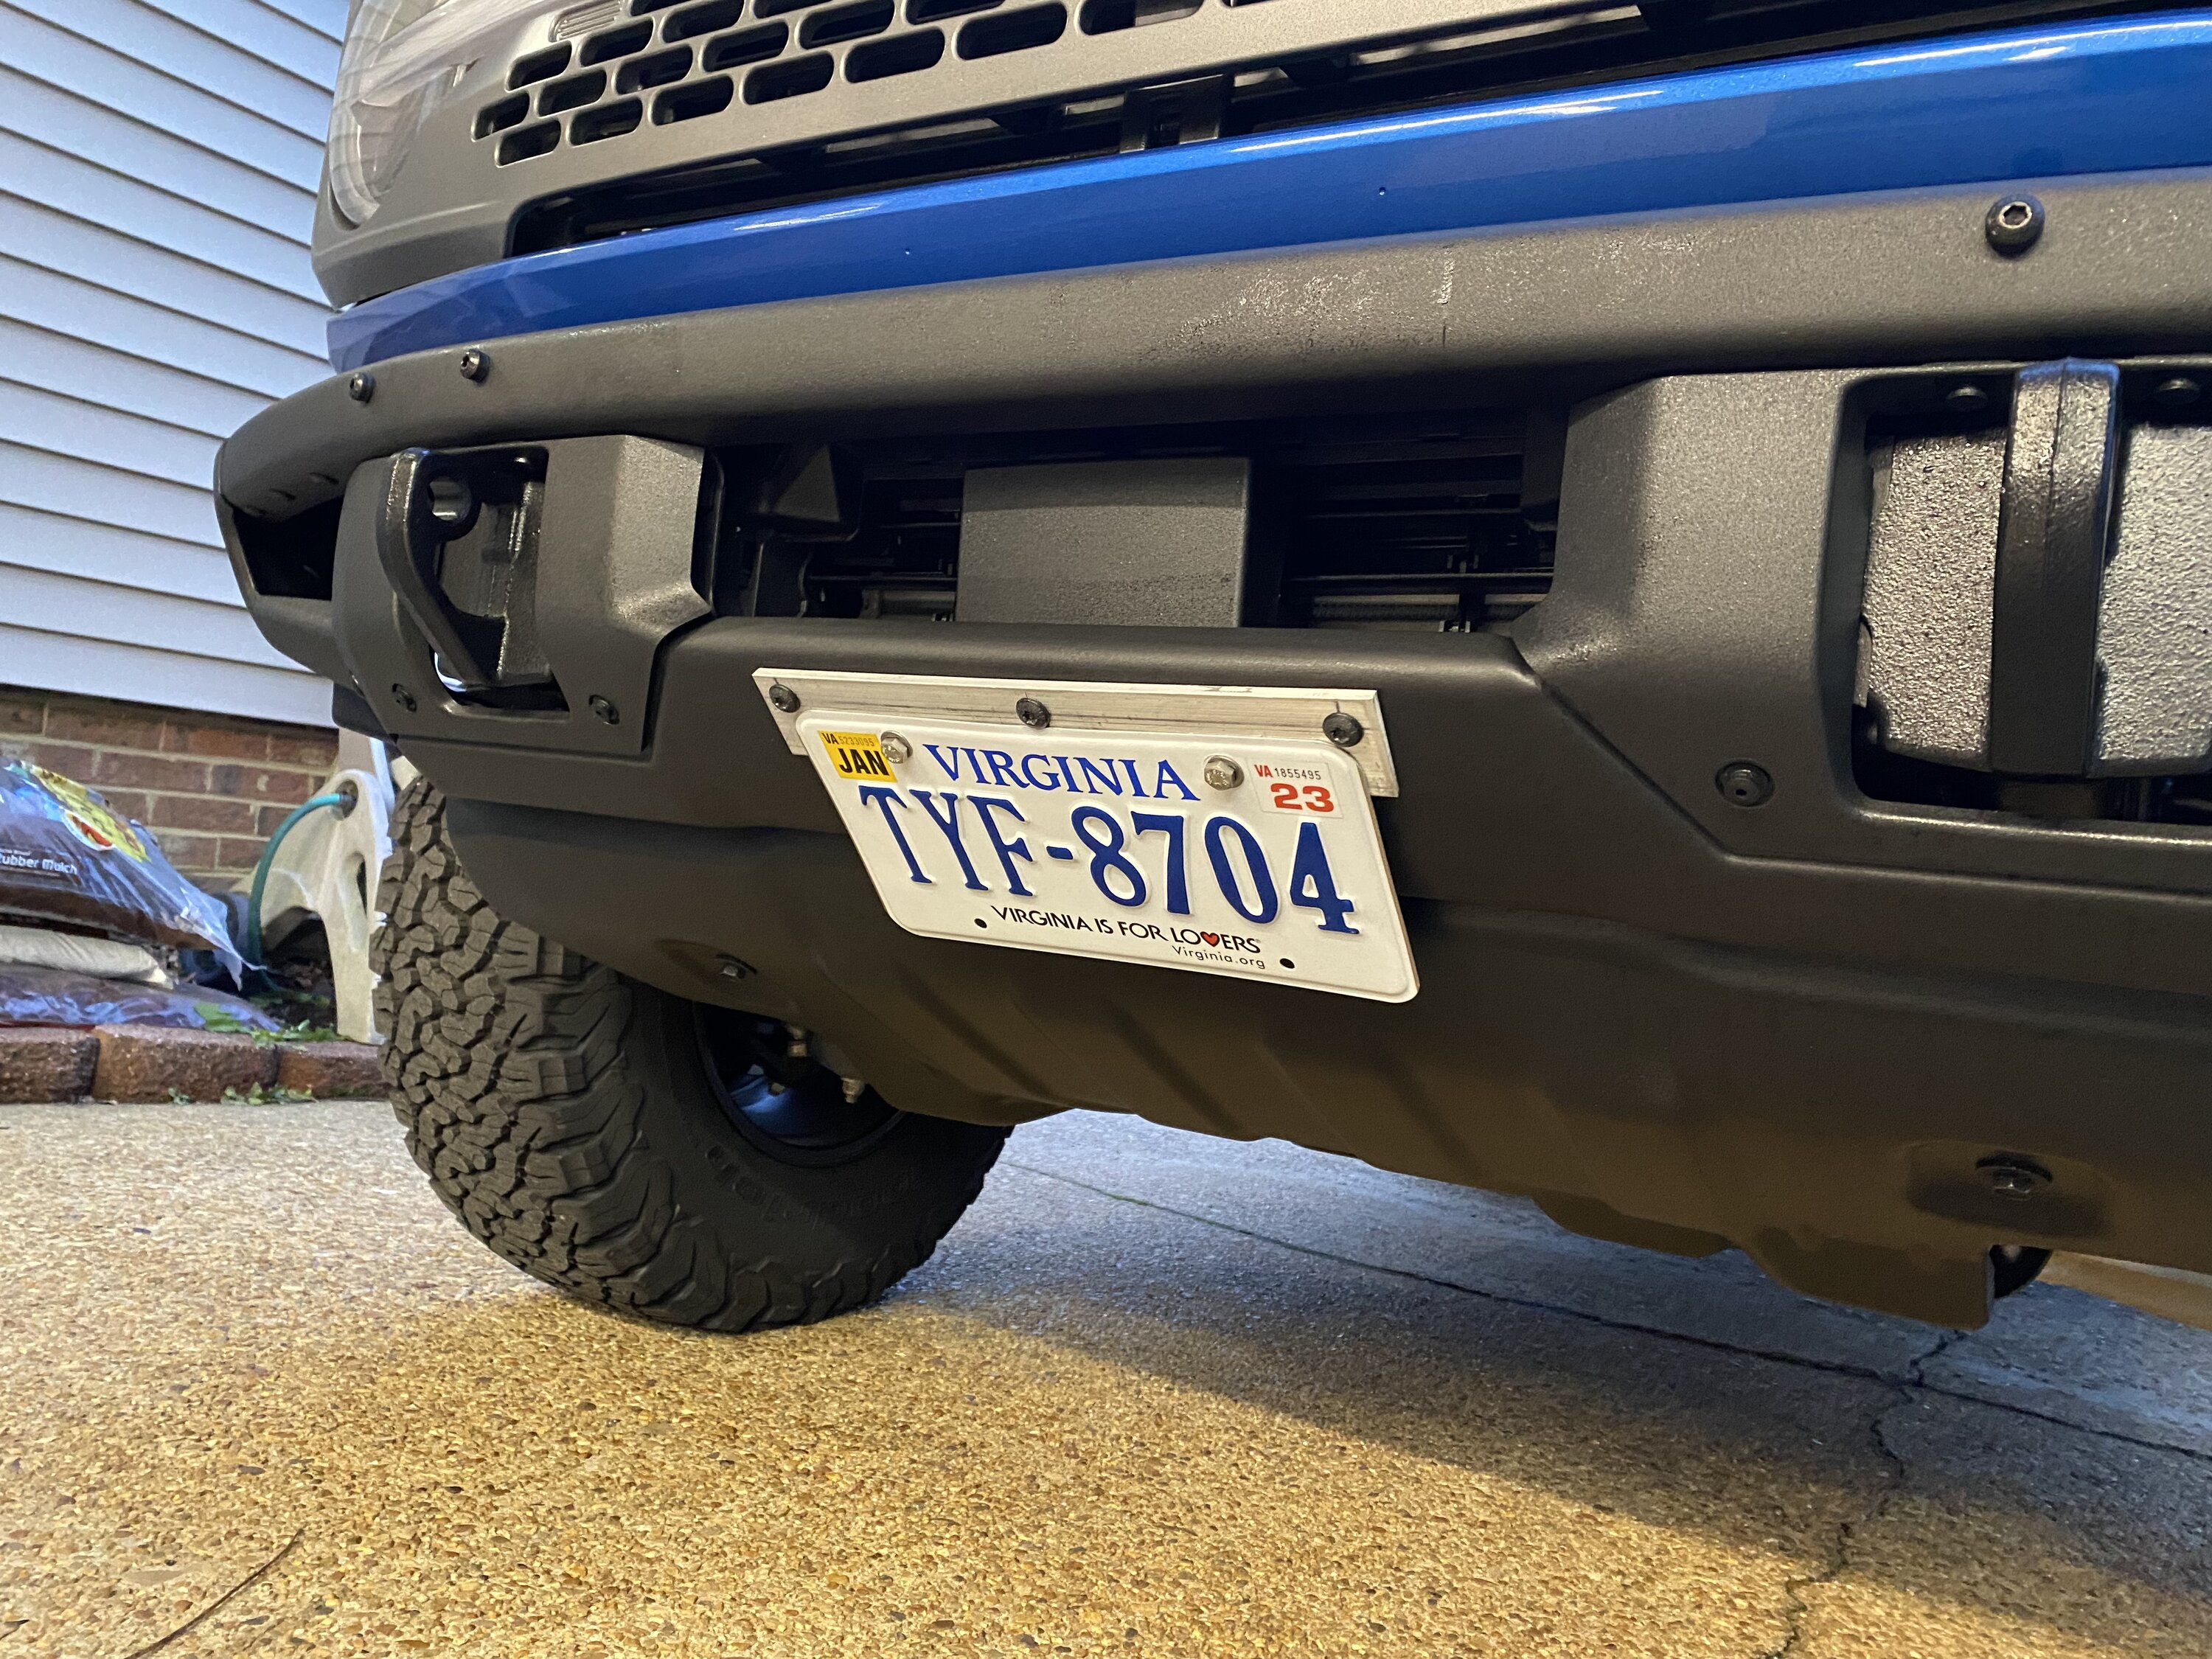 Ford Bronco Mod bumper front license plate mount - what’s everyone using? 5169ADA4-923A-4250-94A1-429CDF916786